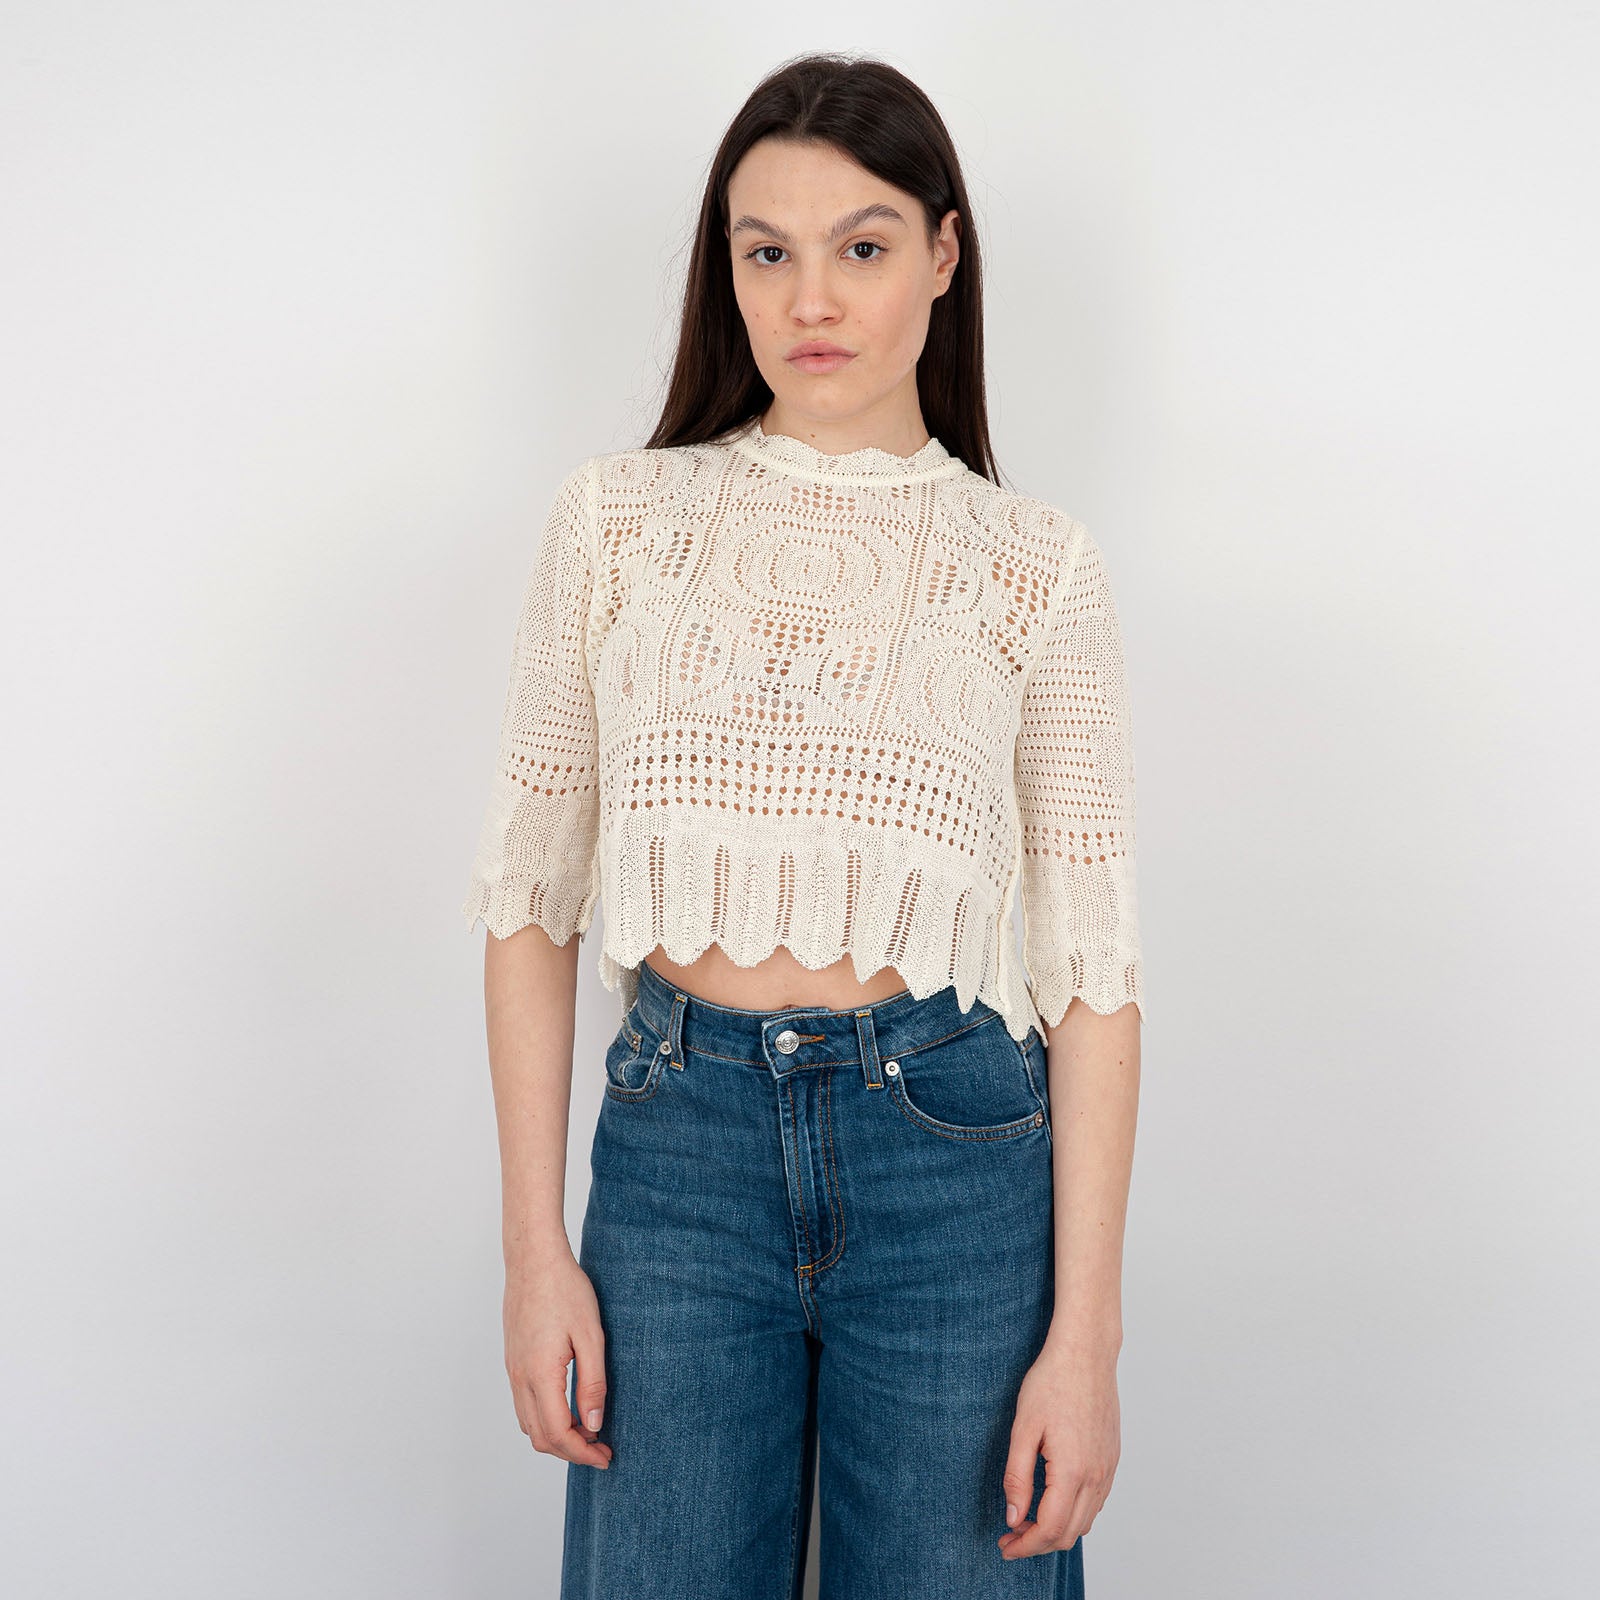 SemiCouture Grace Cotton Ivory Sweater - 7